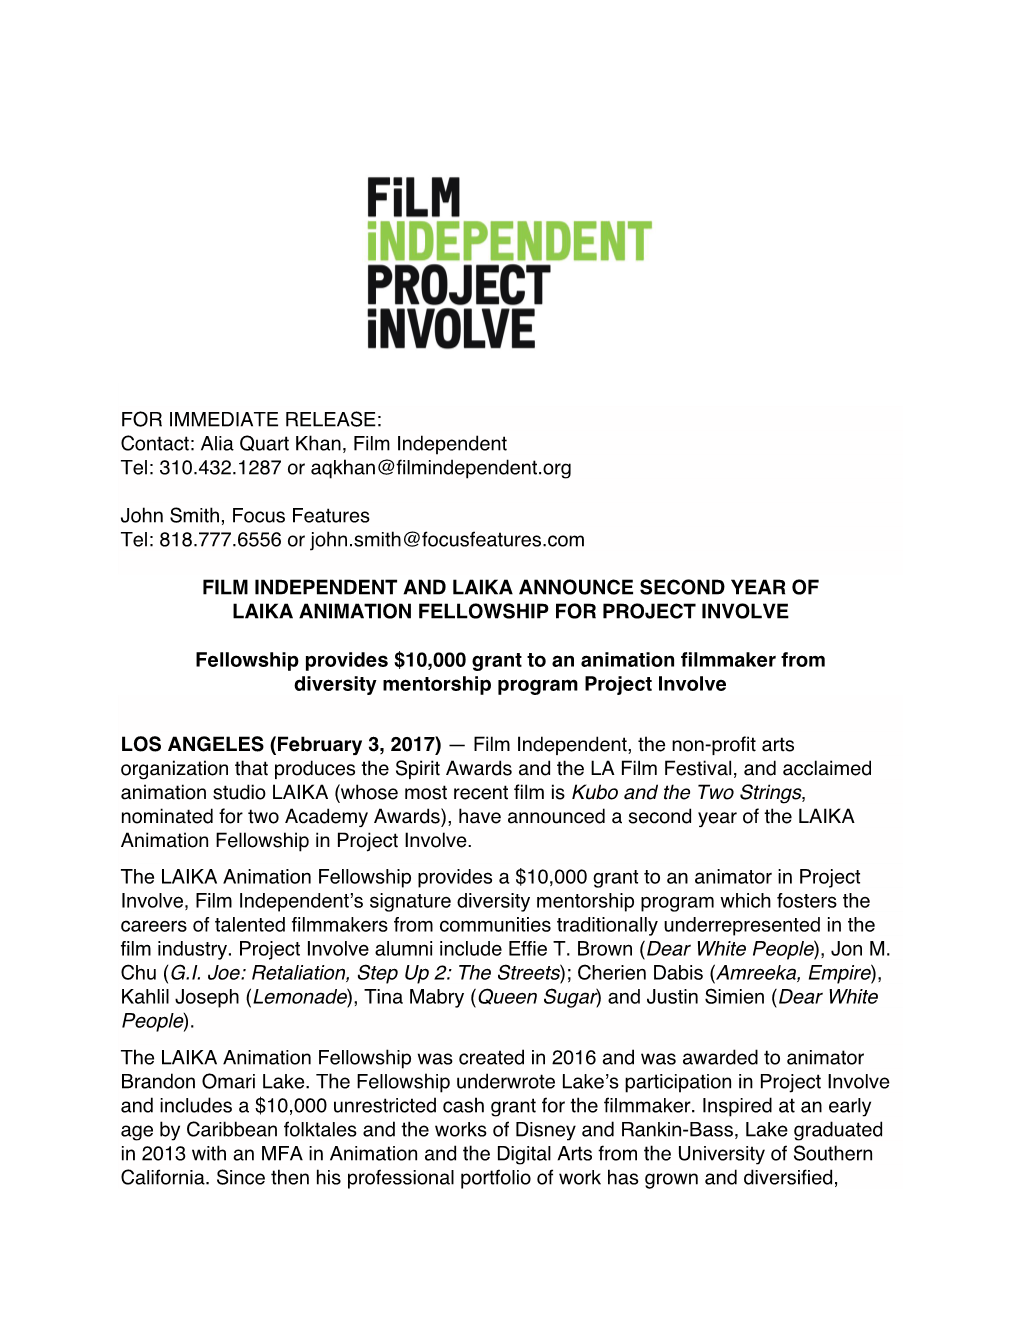 FOR IMMEDIATE RELEASE: Contact: Alia Quart Khan, Film Independent Tel: 310.432.1287 Or Aqkhan@Filmindependent.Org